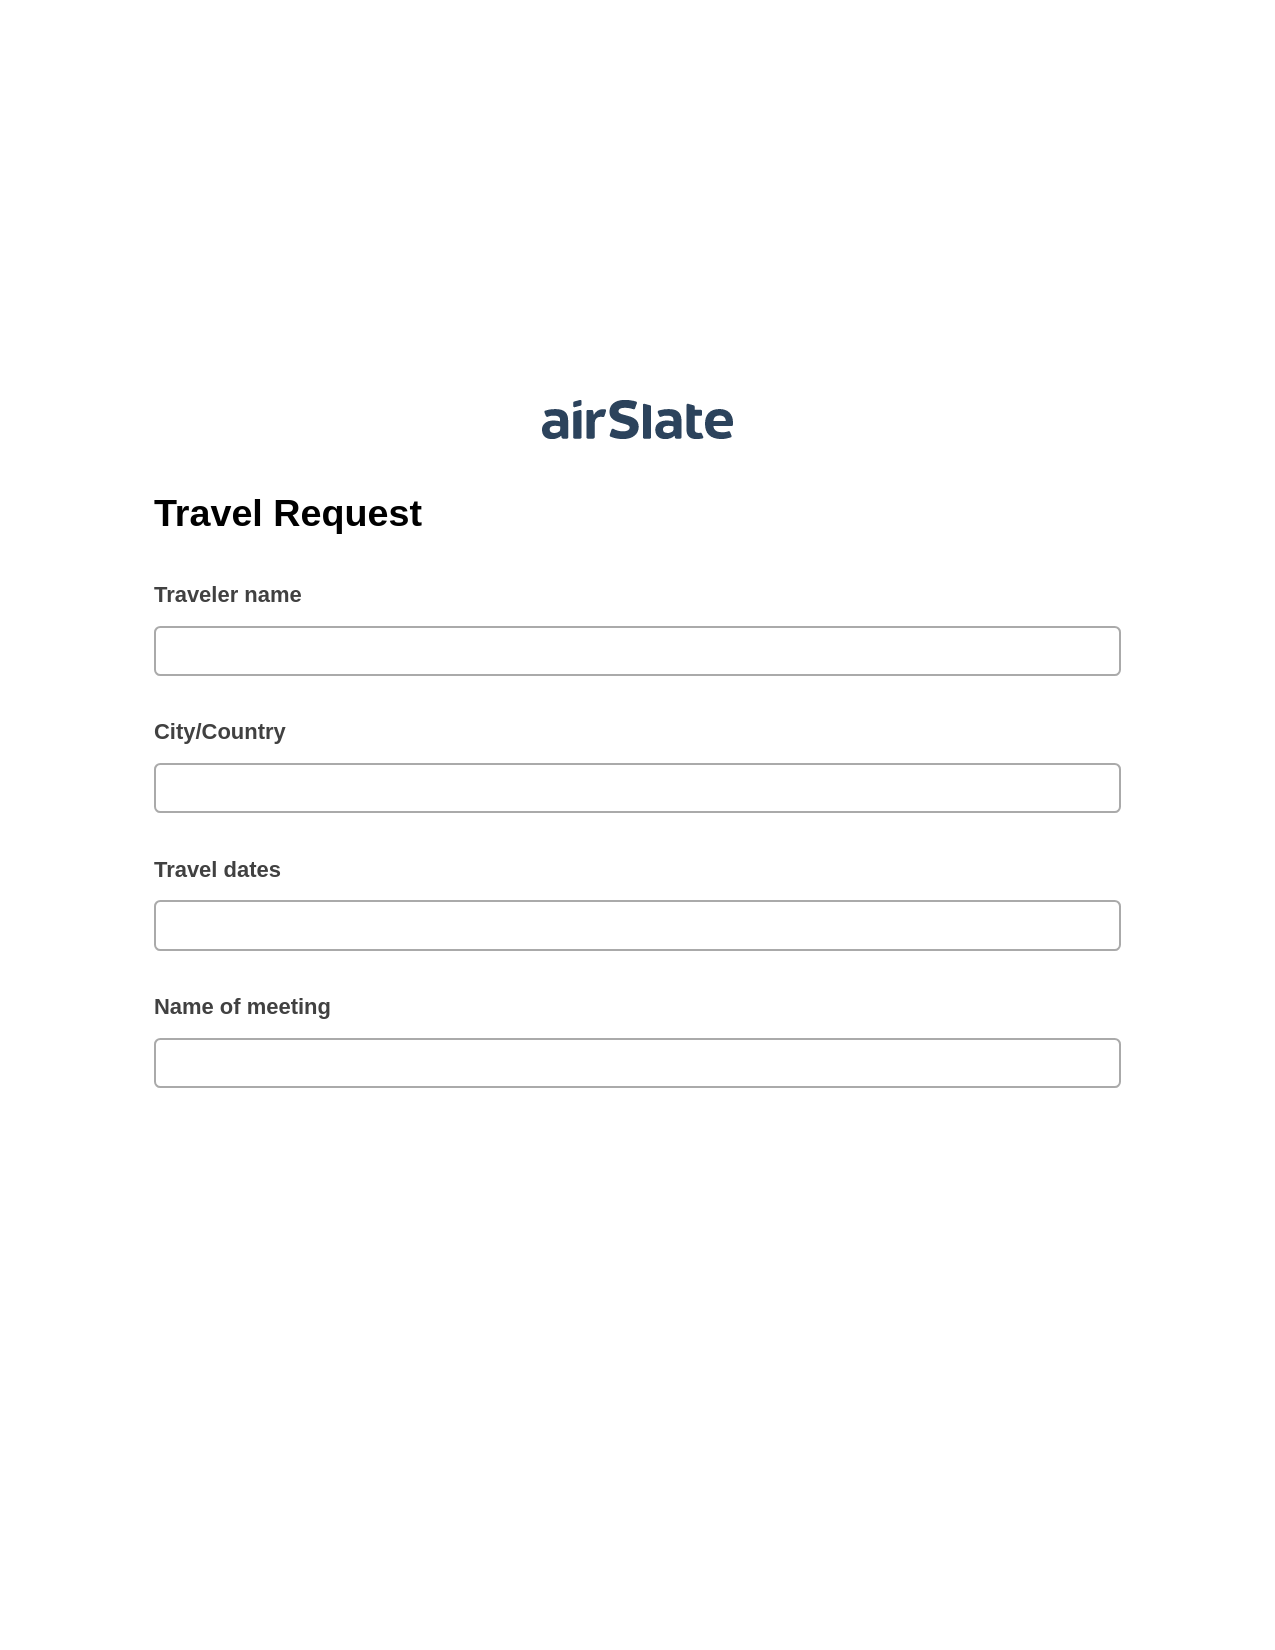 Travel Request Pre-fill from Salesforce Record Bot, Reminder Bot, Slack Two-Way Binding Bot